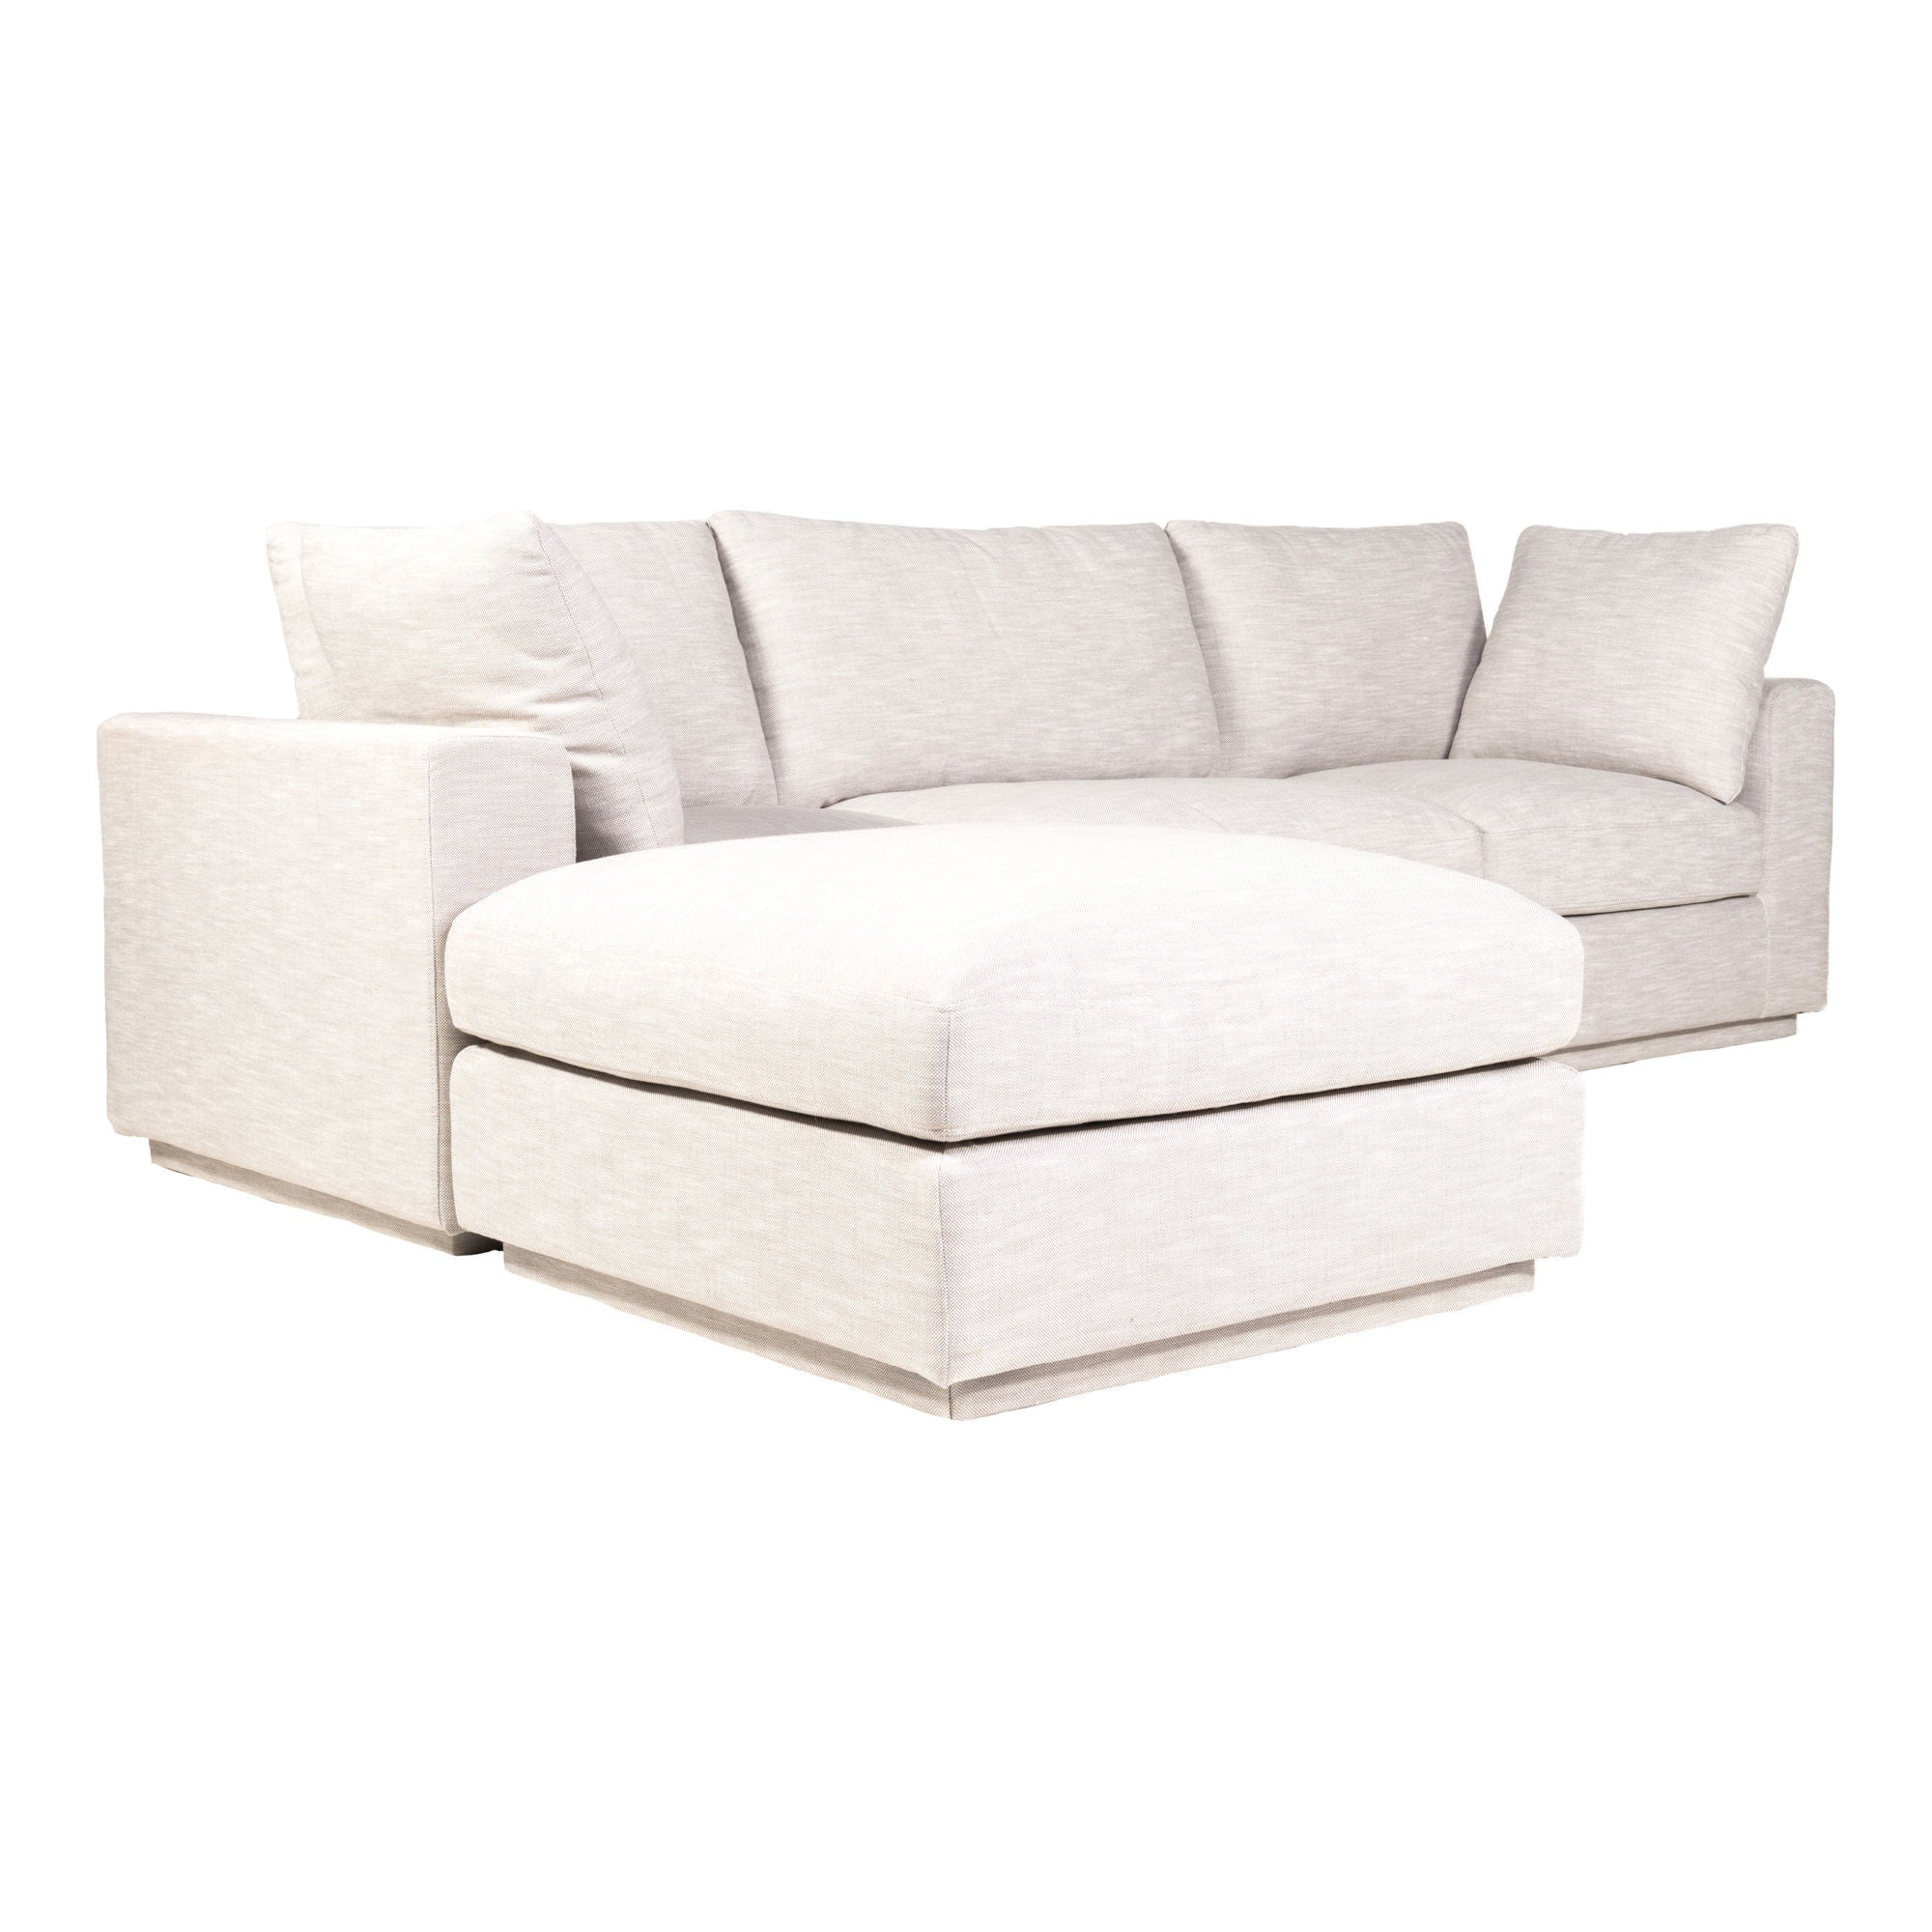 Justin Lounge Modular Sectional - Taupe - Modern & Comfy-Stationary Sectionals-American Furniture Outlet